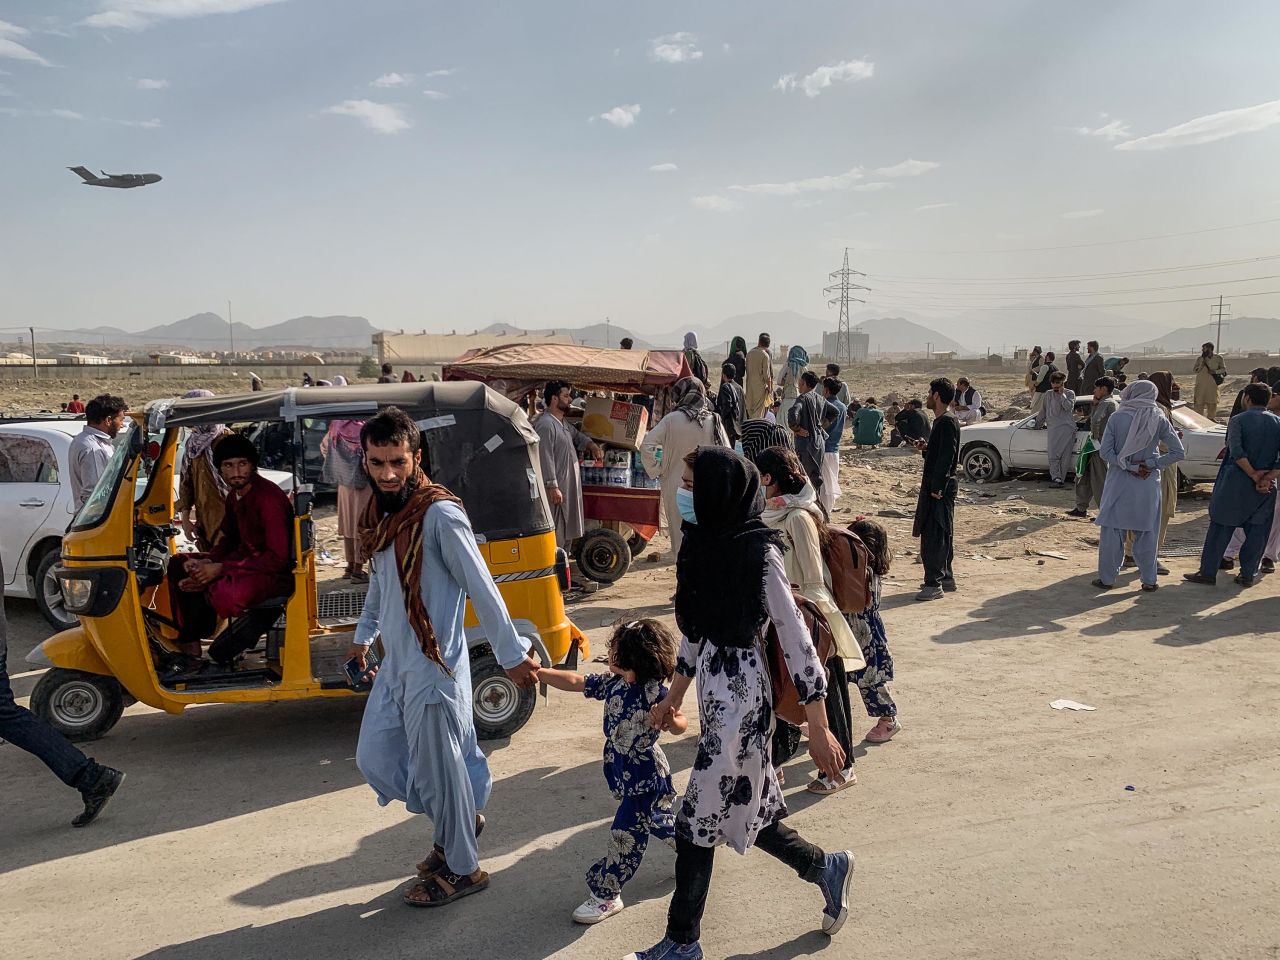 People gather outside the airport in Kabul as a military transport plane takes off on August 21.